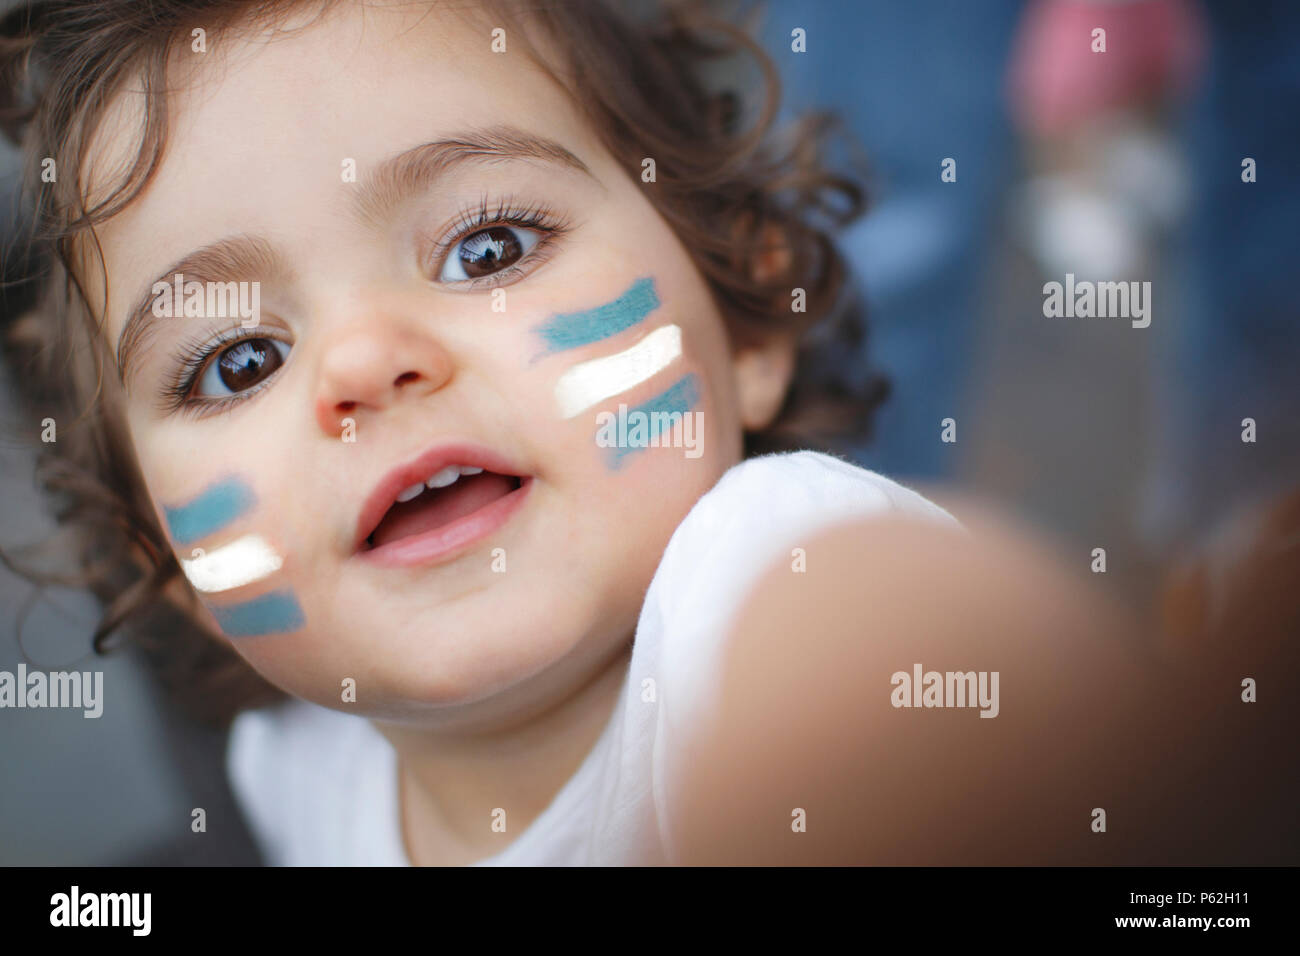 Kid fan with Argentina flag painted on face Stock Photo